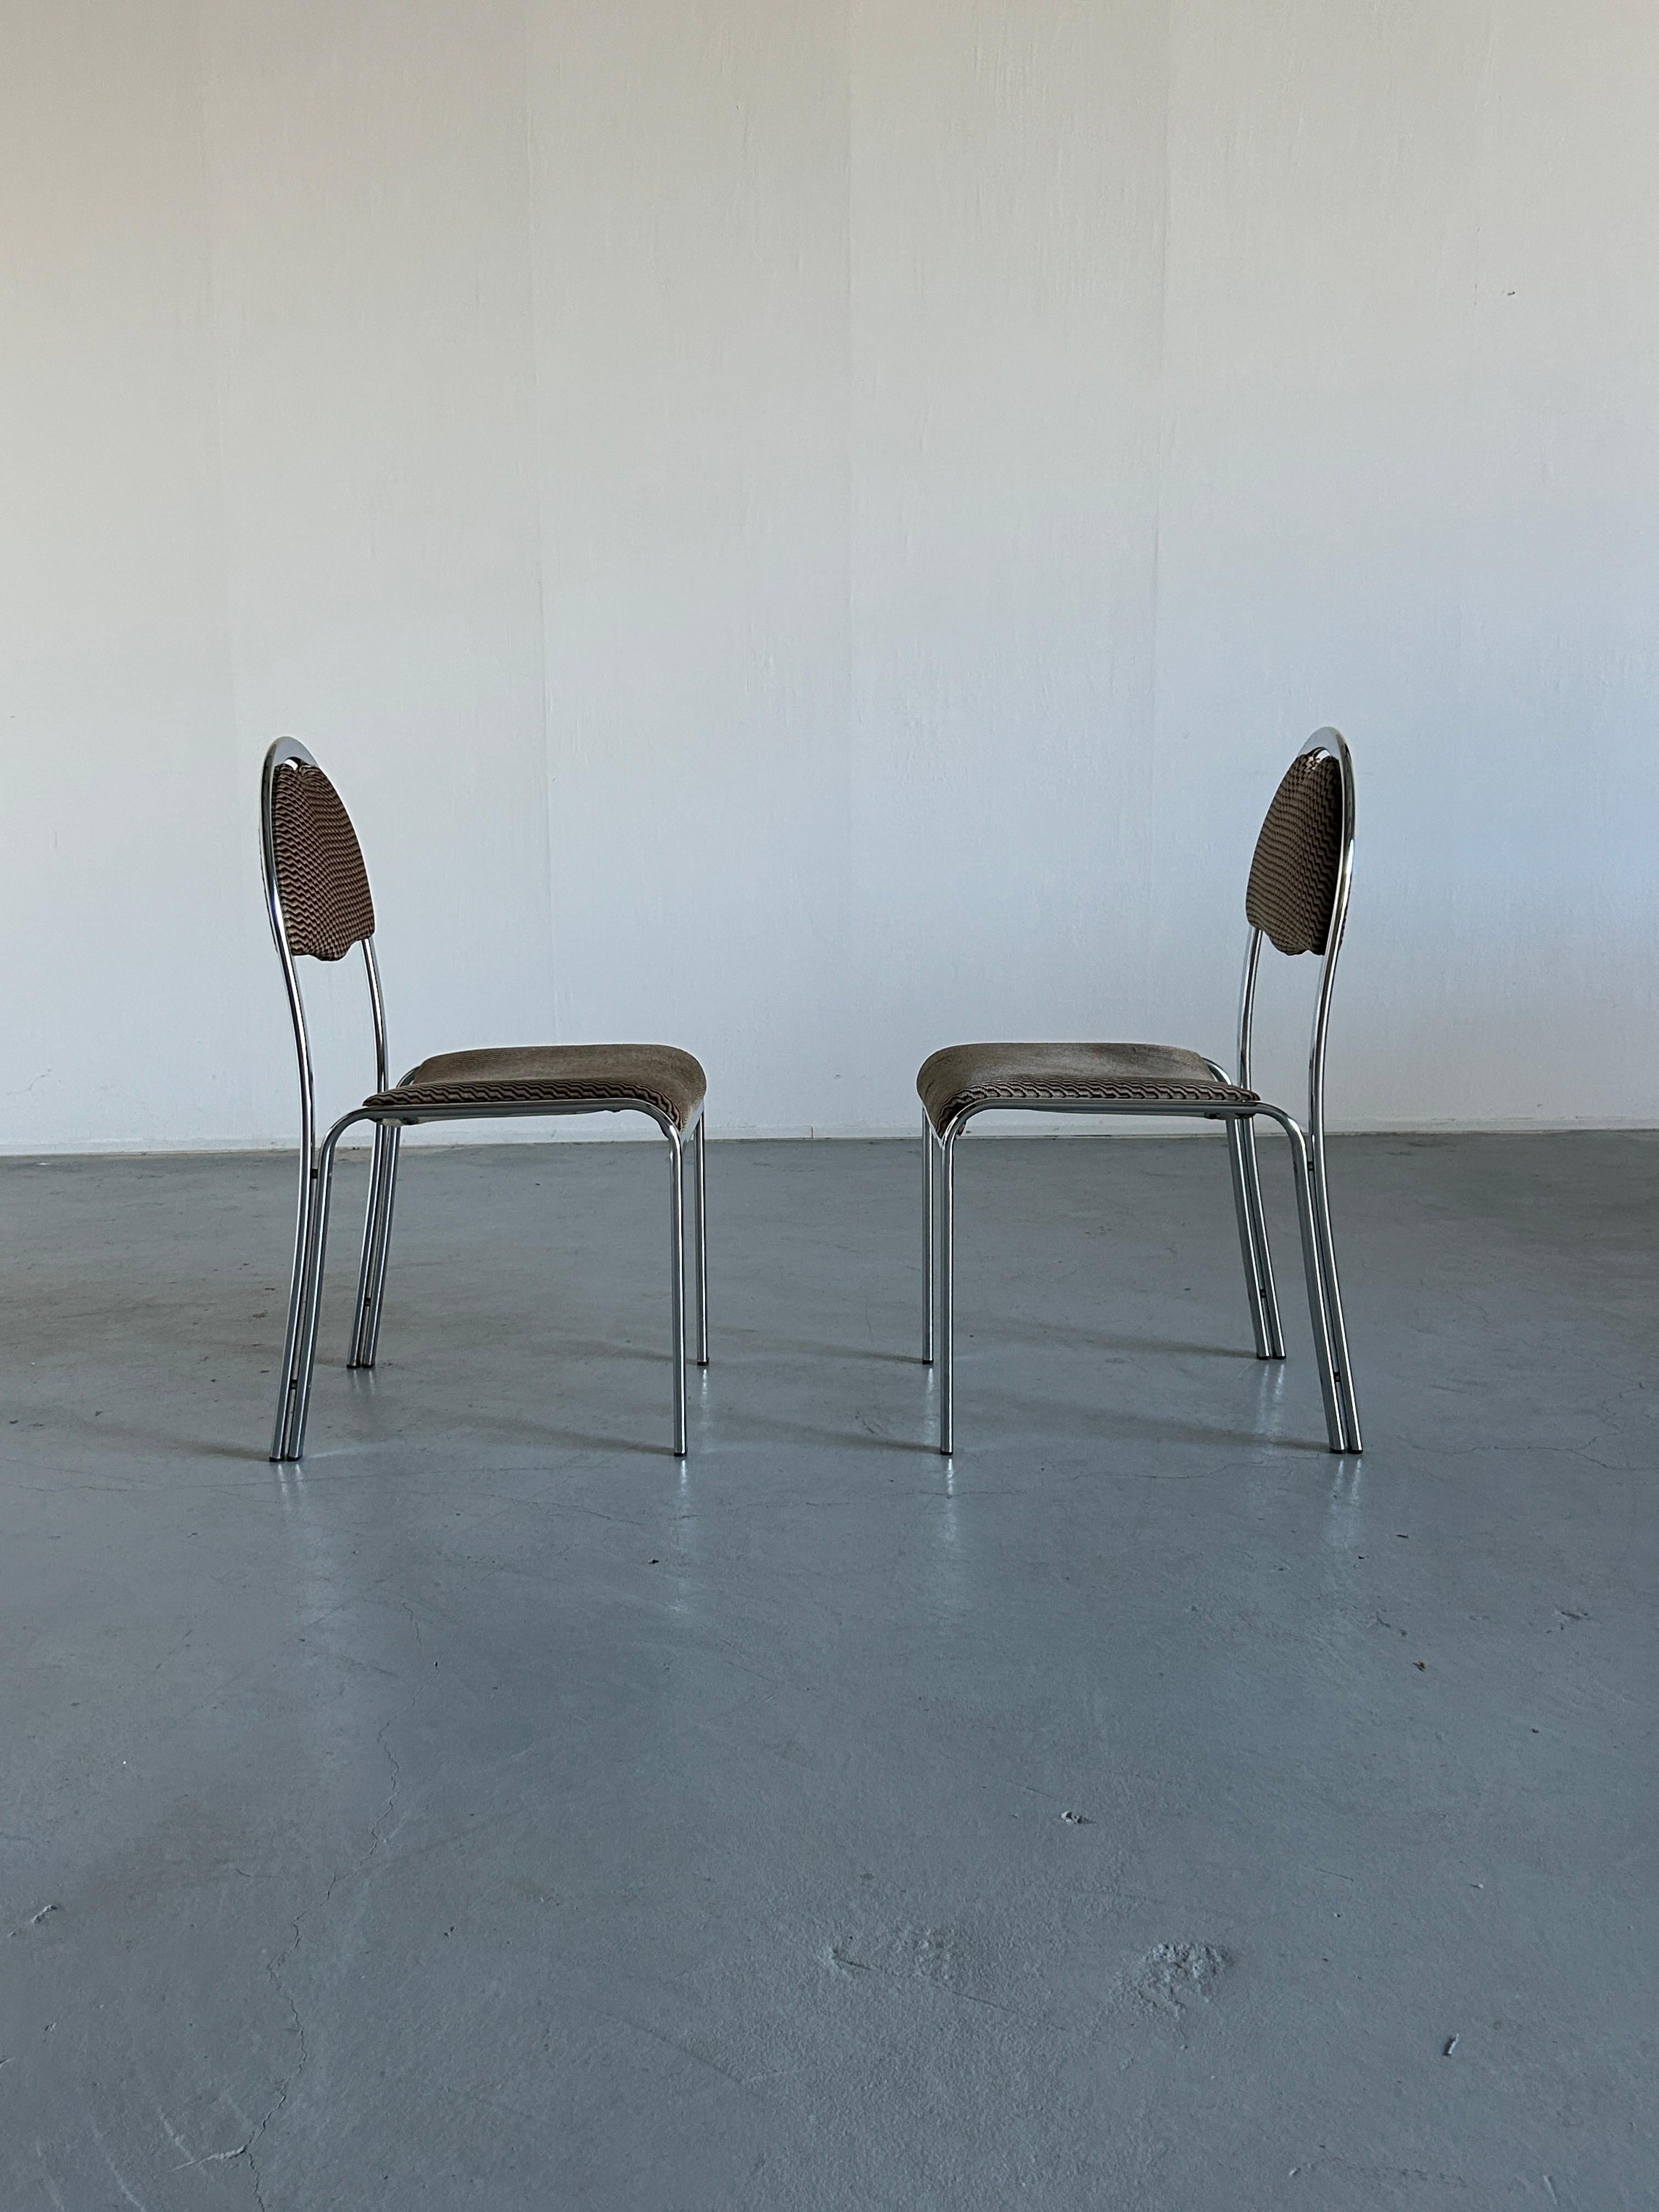 Pair of Vintage Mid-Century Modern Dining Chairs In Style of Saporiti, 70s Italy For Sale 2